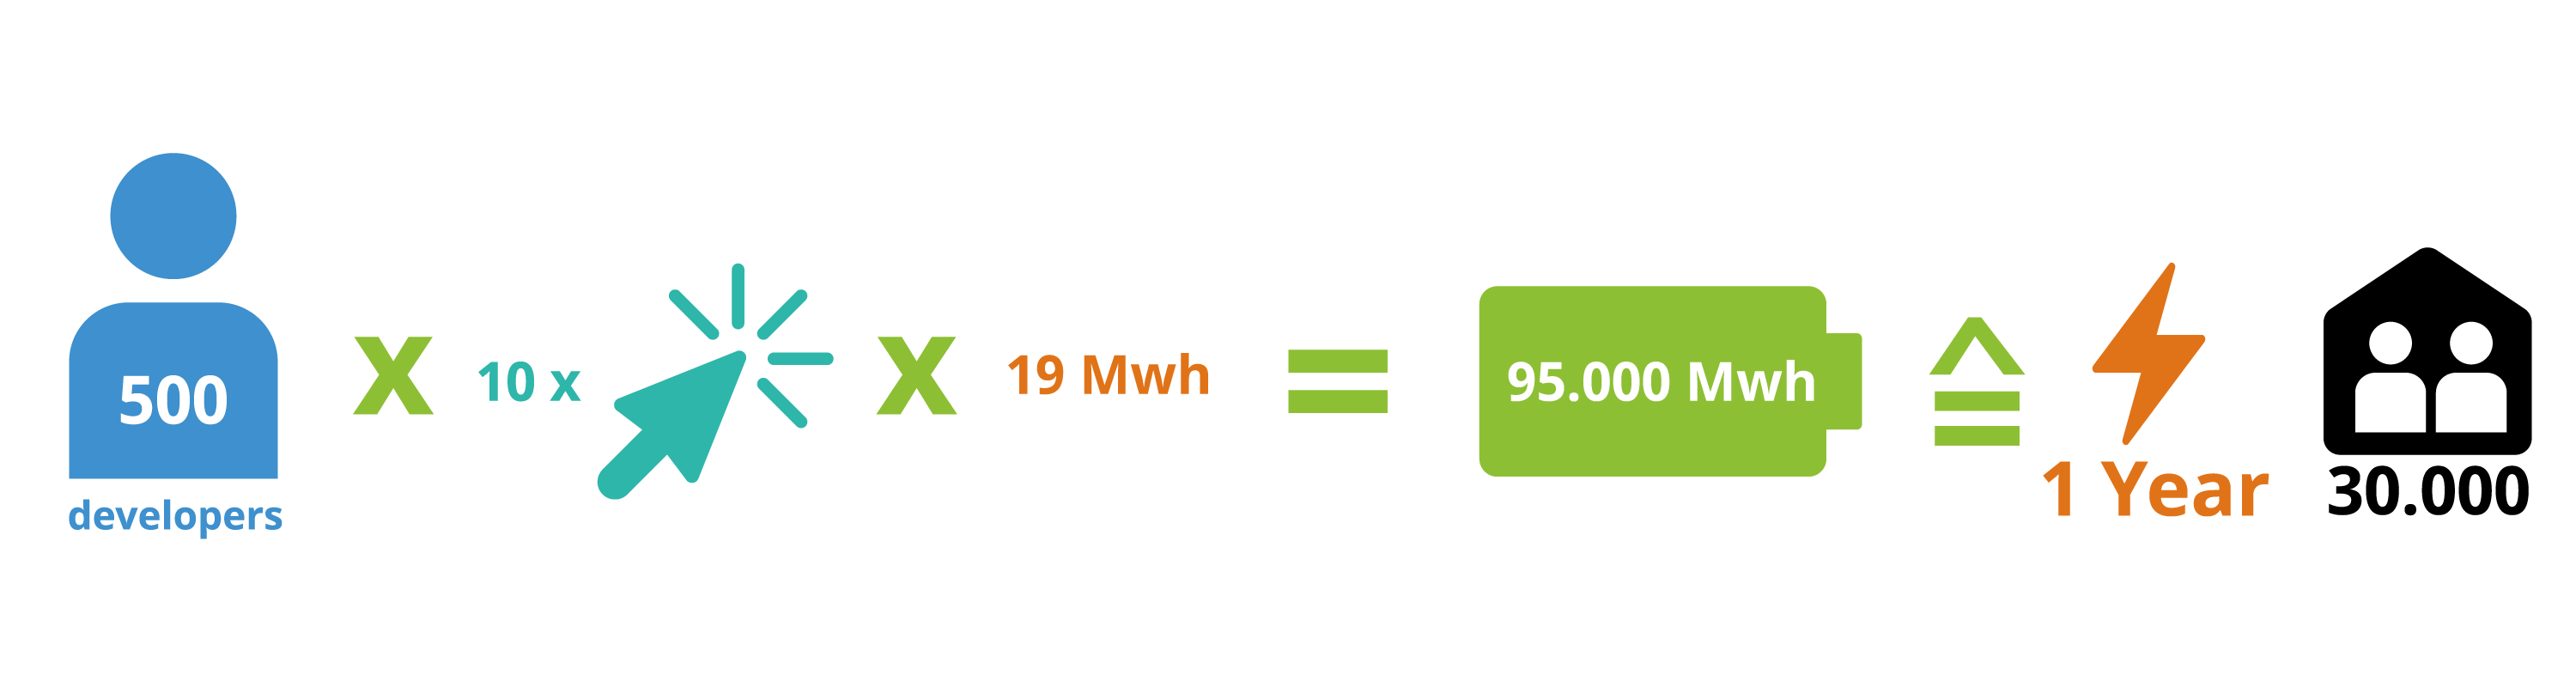 If 500 developers make 10 one CPU-second reductions, this is equal to 95 thousand megawatt-hours of savings, or the energy consumption of 30-thousand two-person households over one year. (Image from KDE published under a <a href="https://spdx.org/licenses/CC-BY-SA-4.0.html">CC-BY-SA-4.0</a> license. <a href="https://thenounproject.com/icon/cursor-3743073/">Cursor</a> icon by Alice-vector licensed under a <a href="https://spdx.org/licenses/CC-BY-3.0.html">CC-BY</a> license. Design by Lana Lutz.)